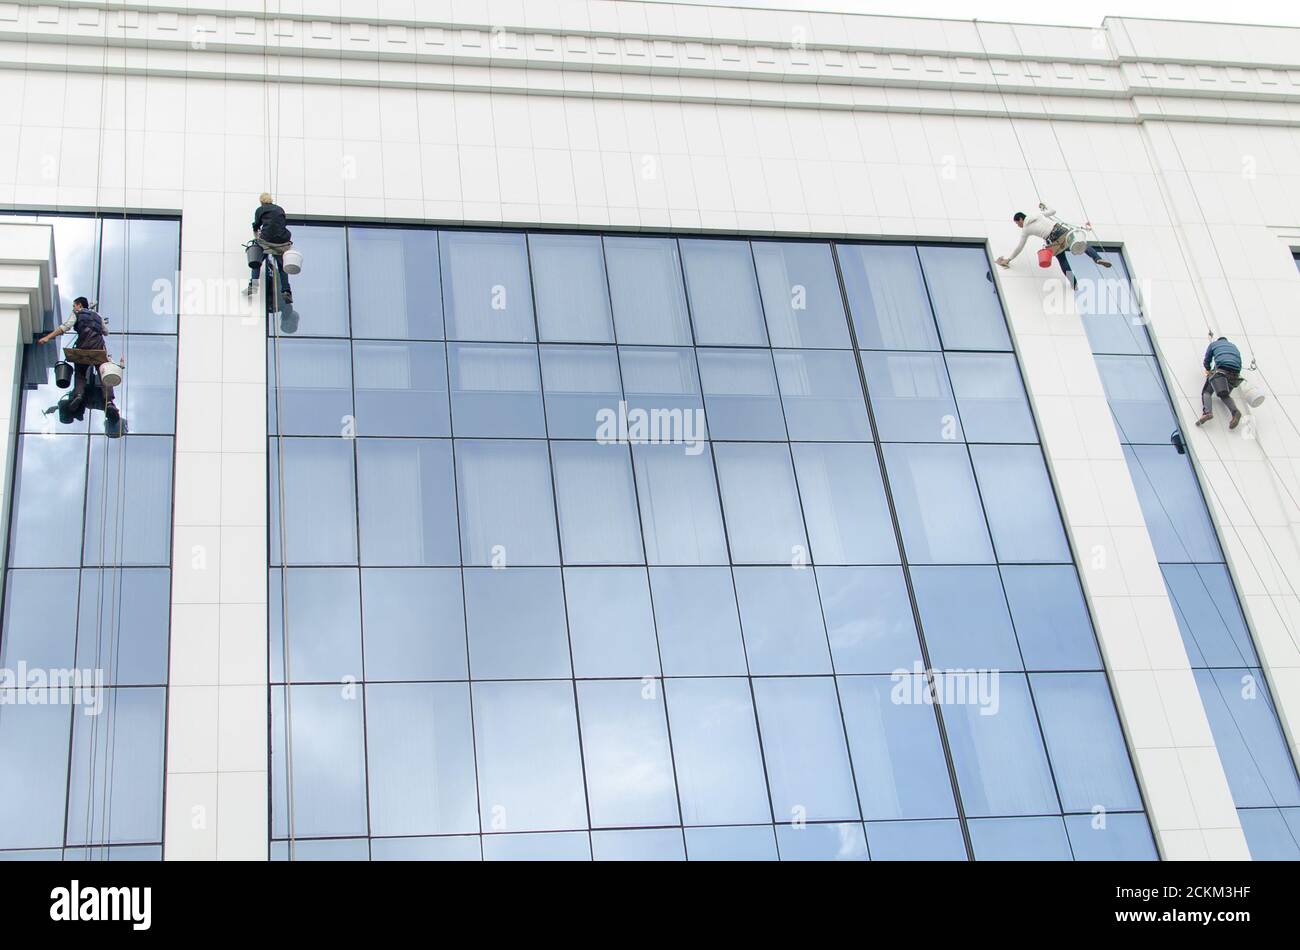 Four people climber, descended on cables from the roof of the building with buckets and rags, and wash the building Stock Photo